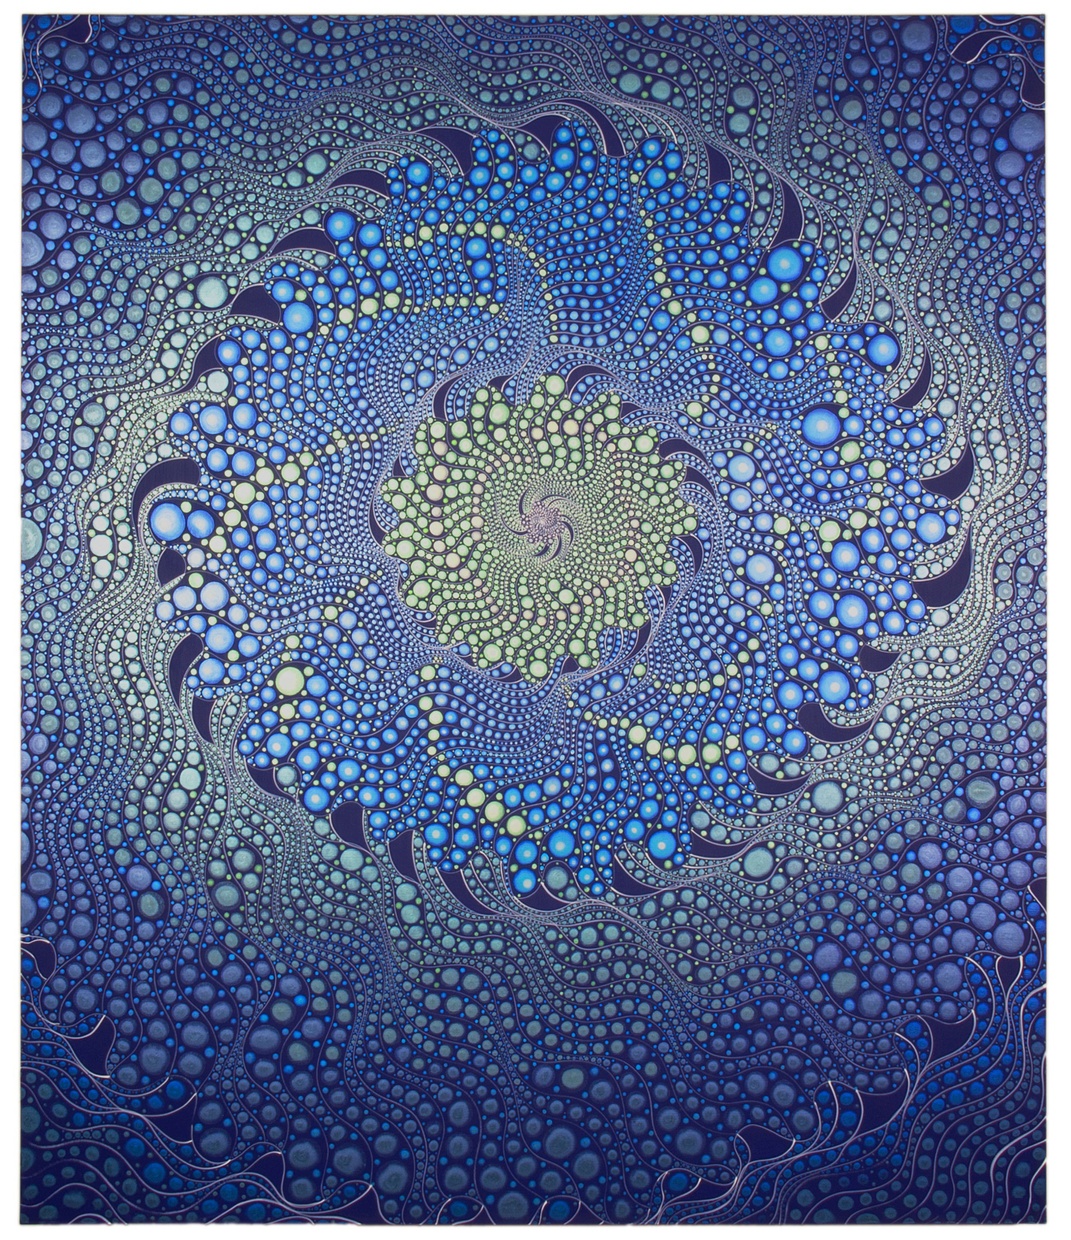 A mandala painted with blues, whites, and yellows, composed of three circular layers of dots and ripples. The outer layer begins a gradient from dark to light, with yellow and blue dots woven into the center.